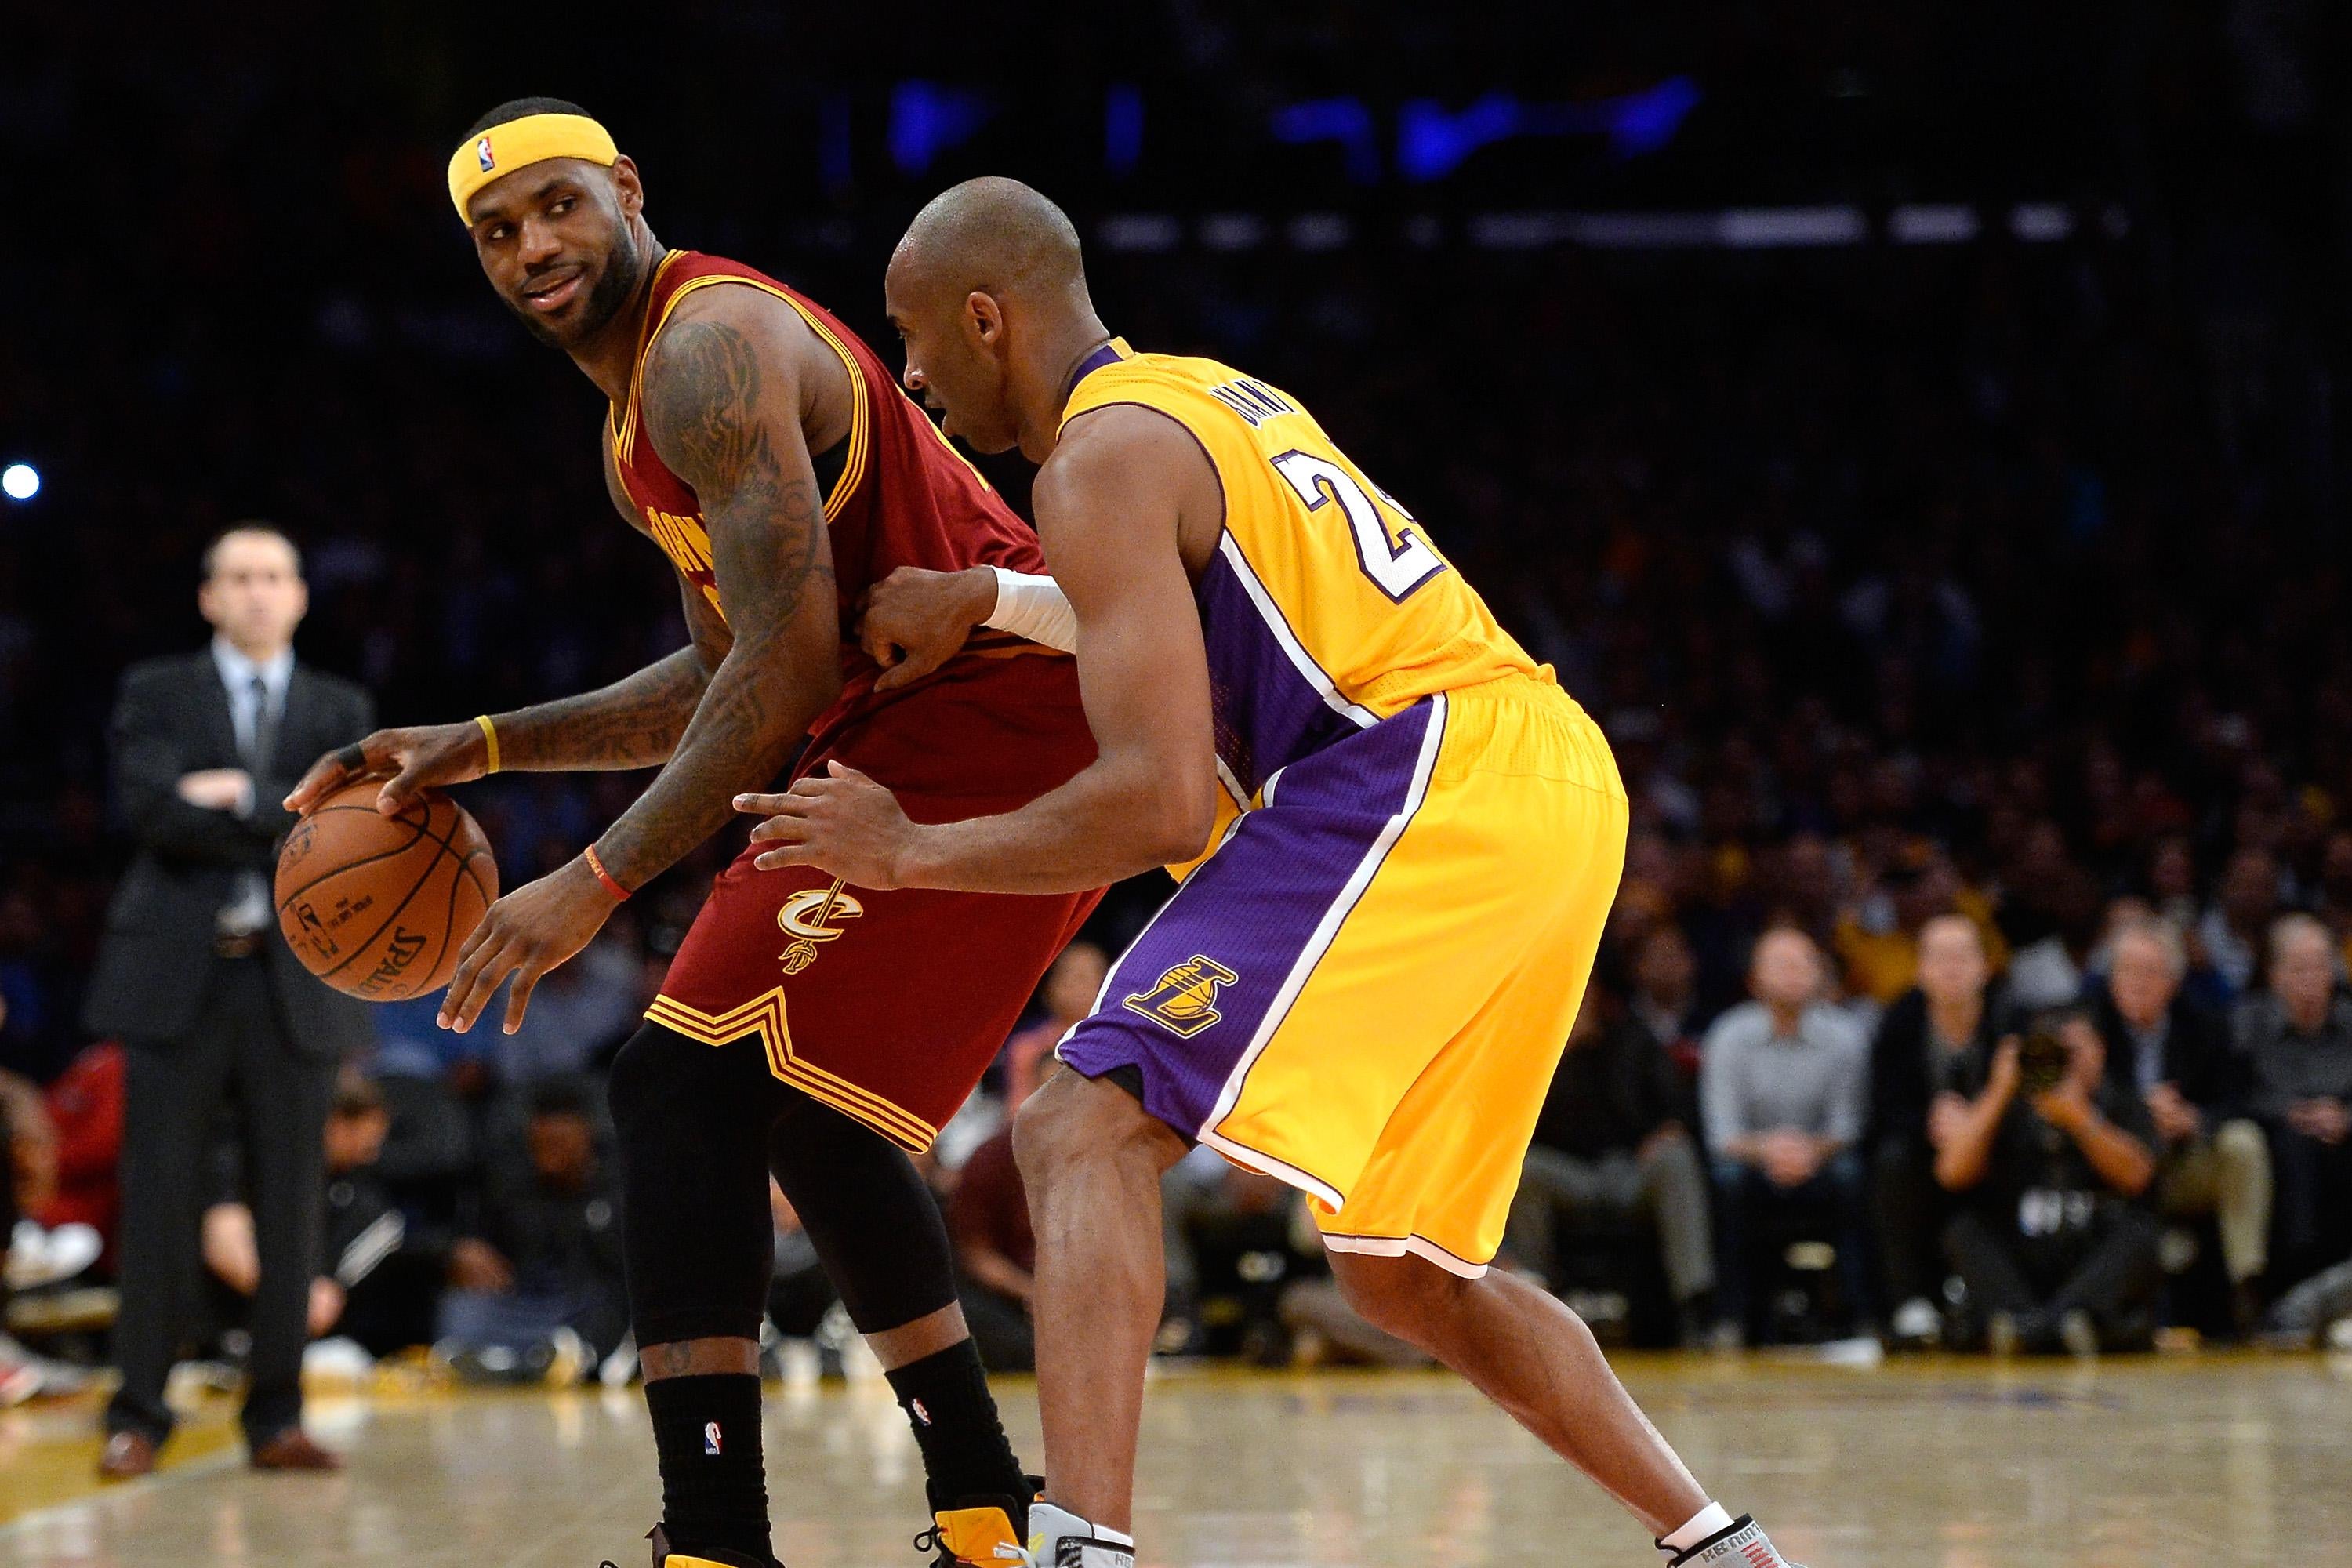 LeBron James of the Cleveland Cavaliers dribbles as he is guarded by Kobe Bryant.